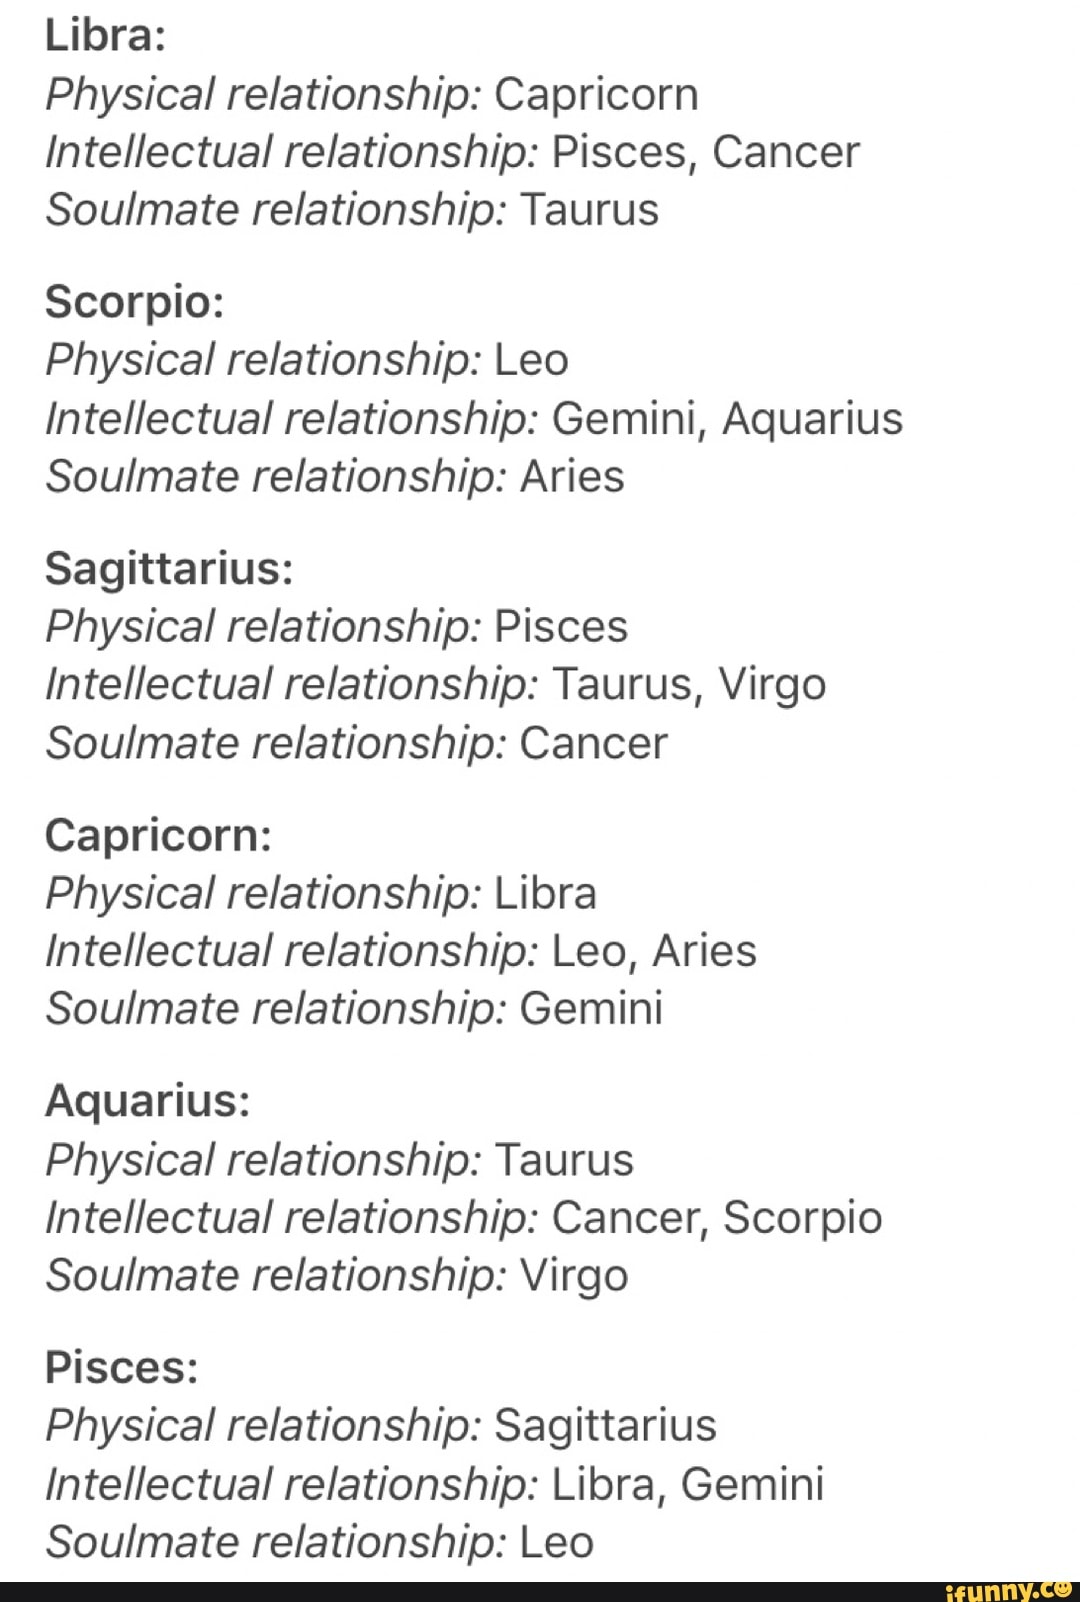 Can Pisces and Taurus be soulmates?